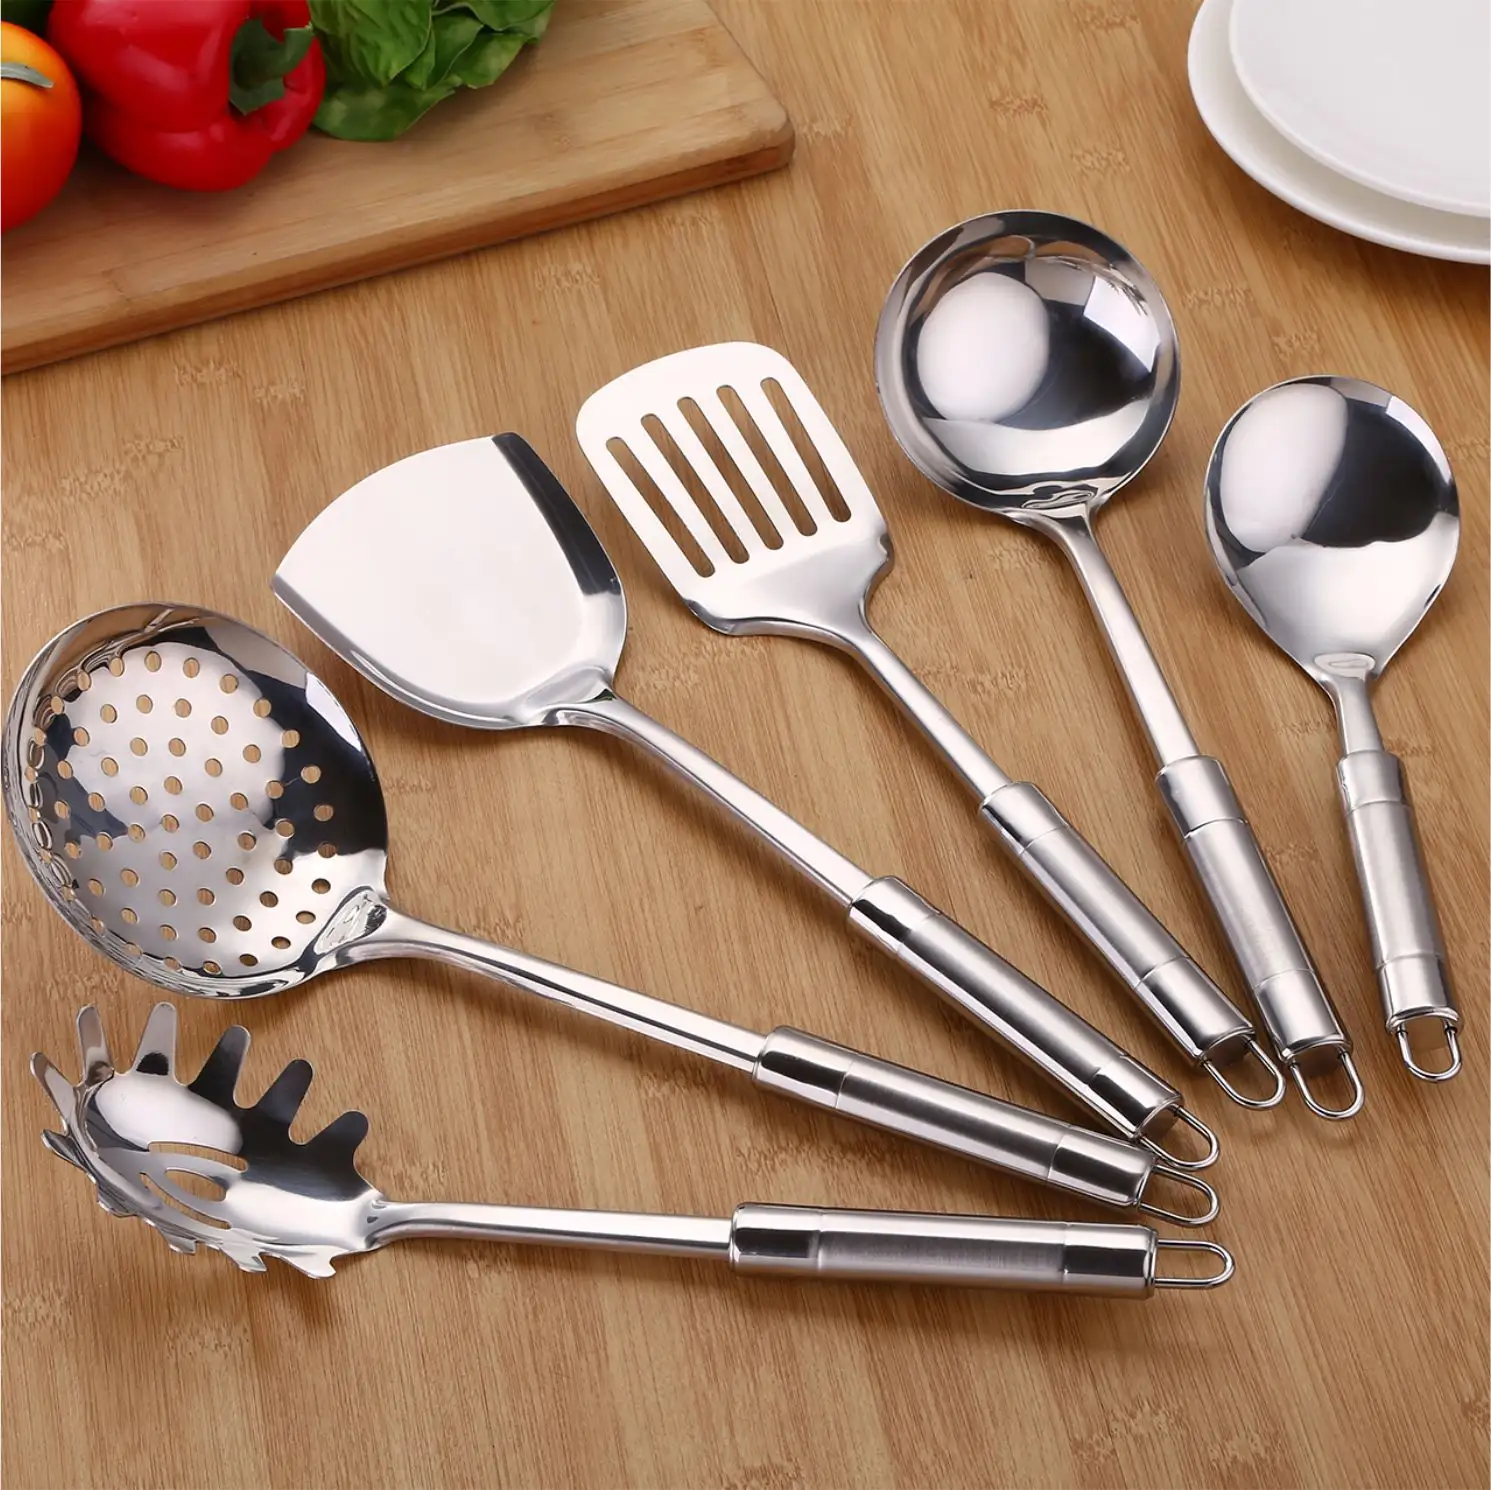 Food grade cooking kitchen utensils tool set with stainless steel